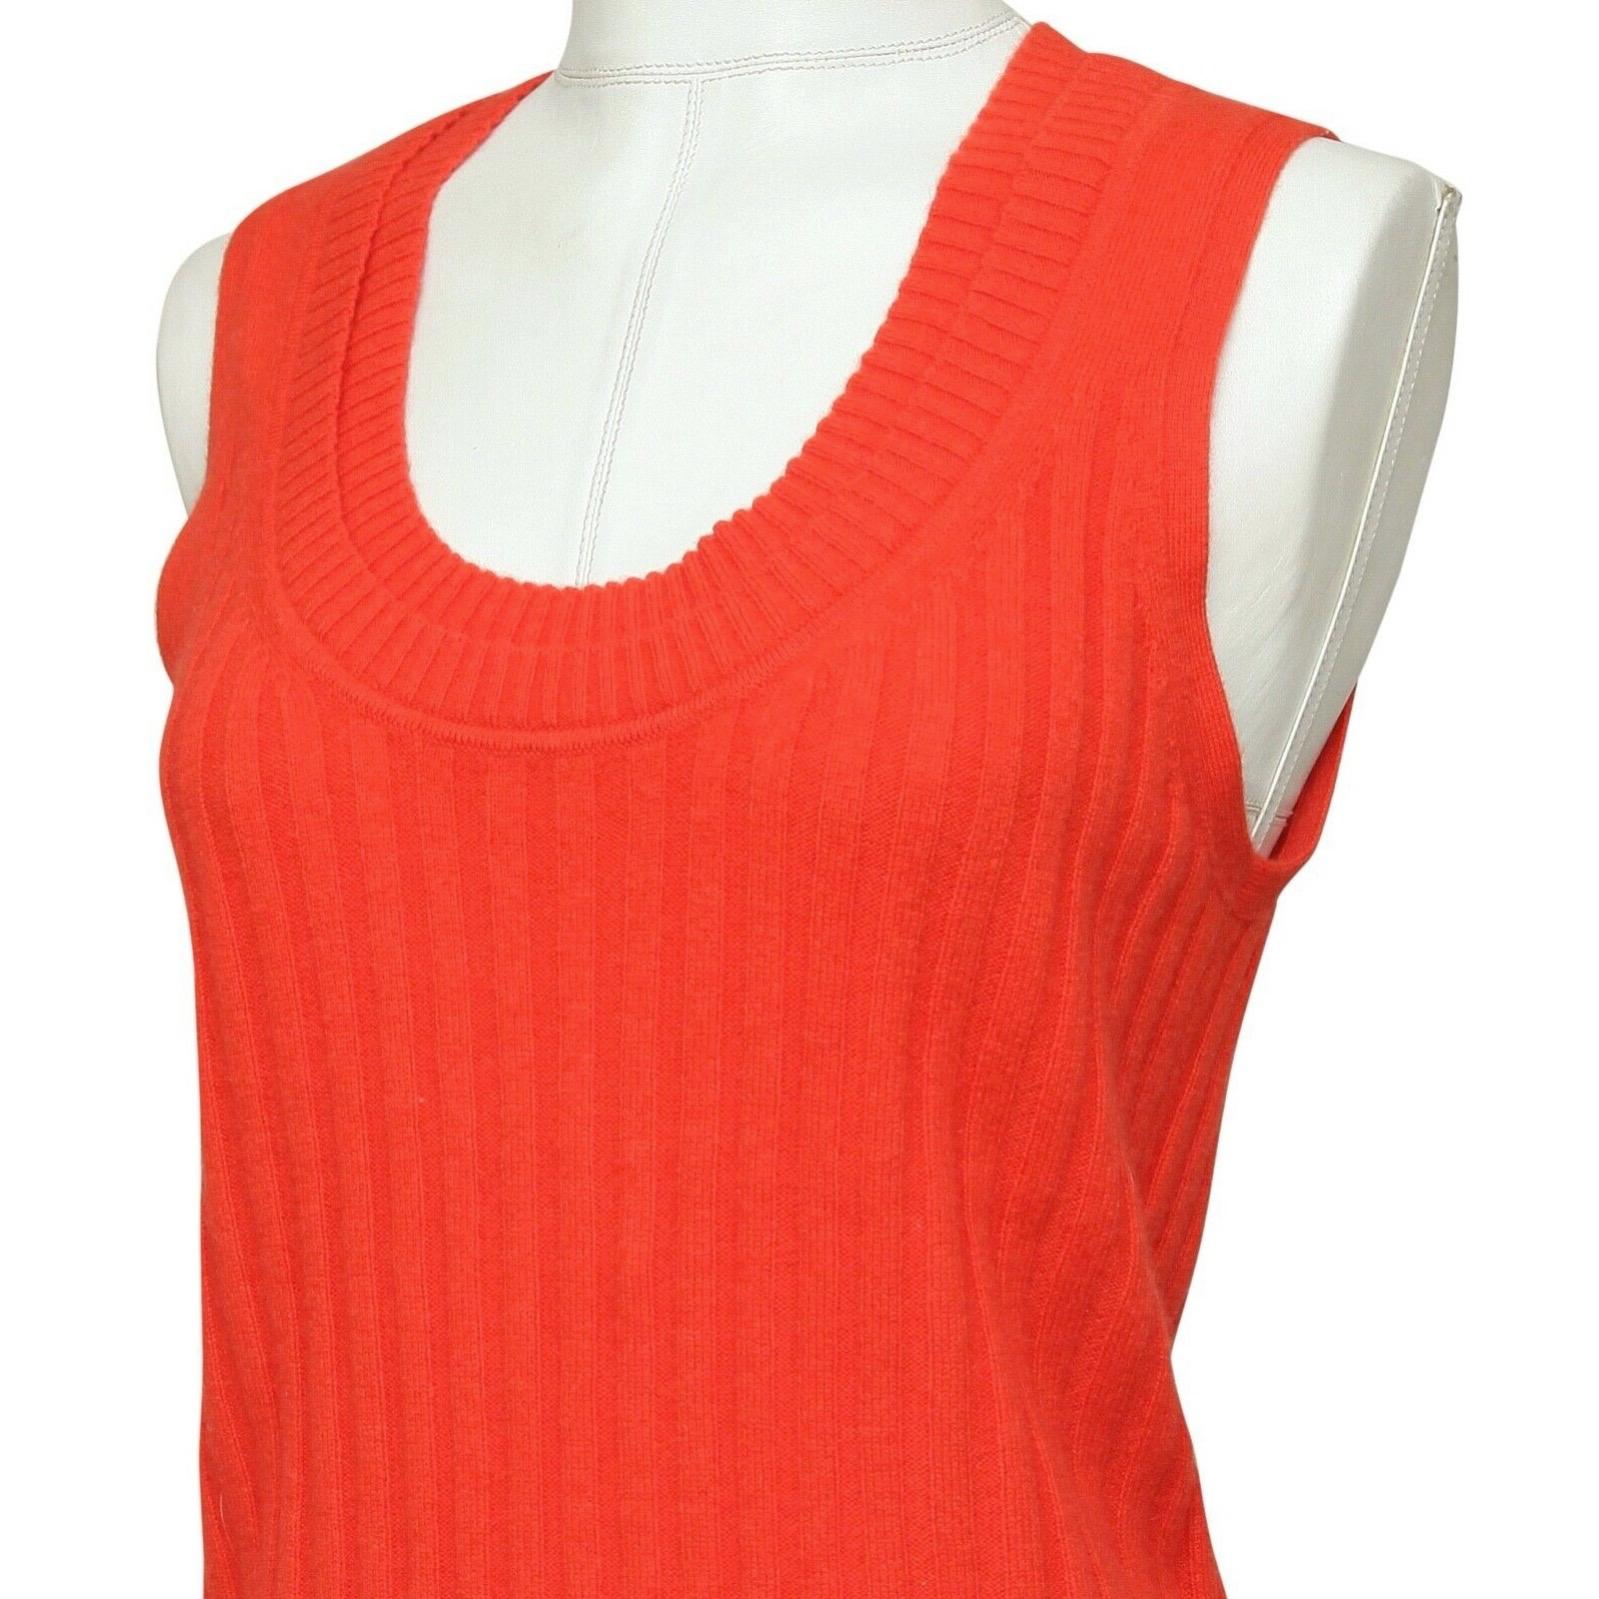 3.1 PHILLIP LIM Orange Sweater Knit Sleeveless Scoop Neck Ribbed Cashmere L NWT For Sale 2